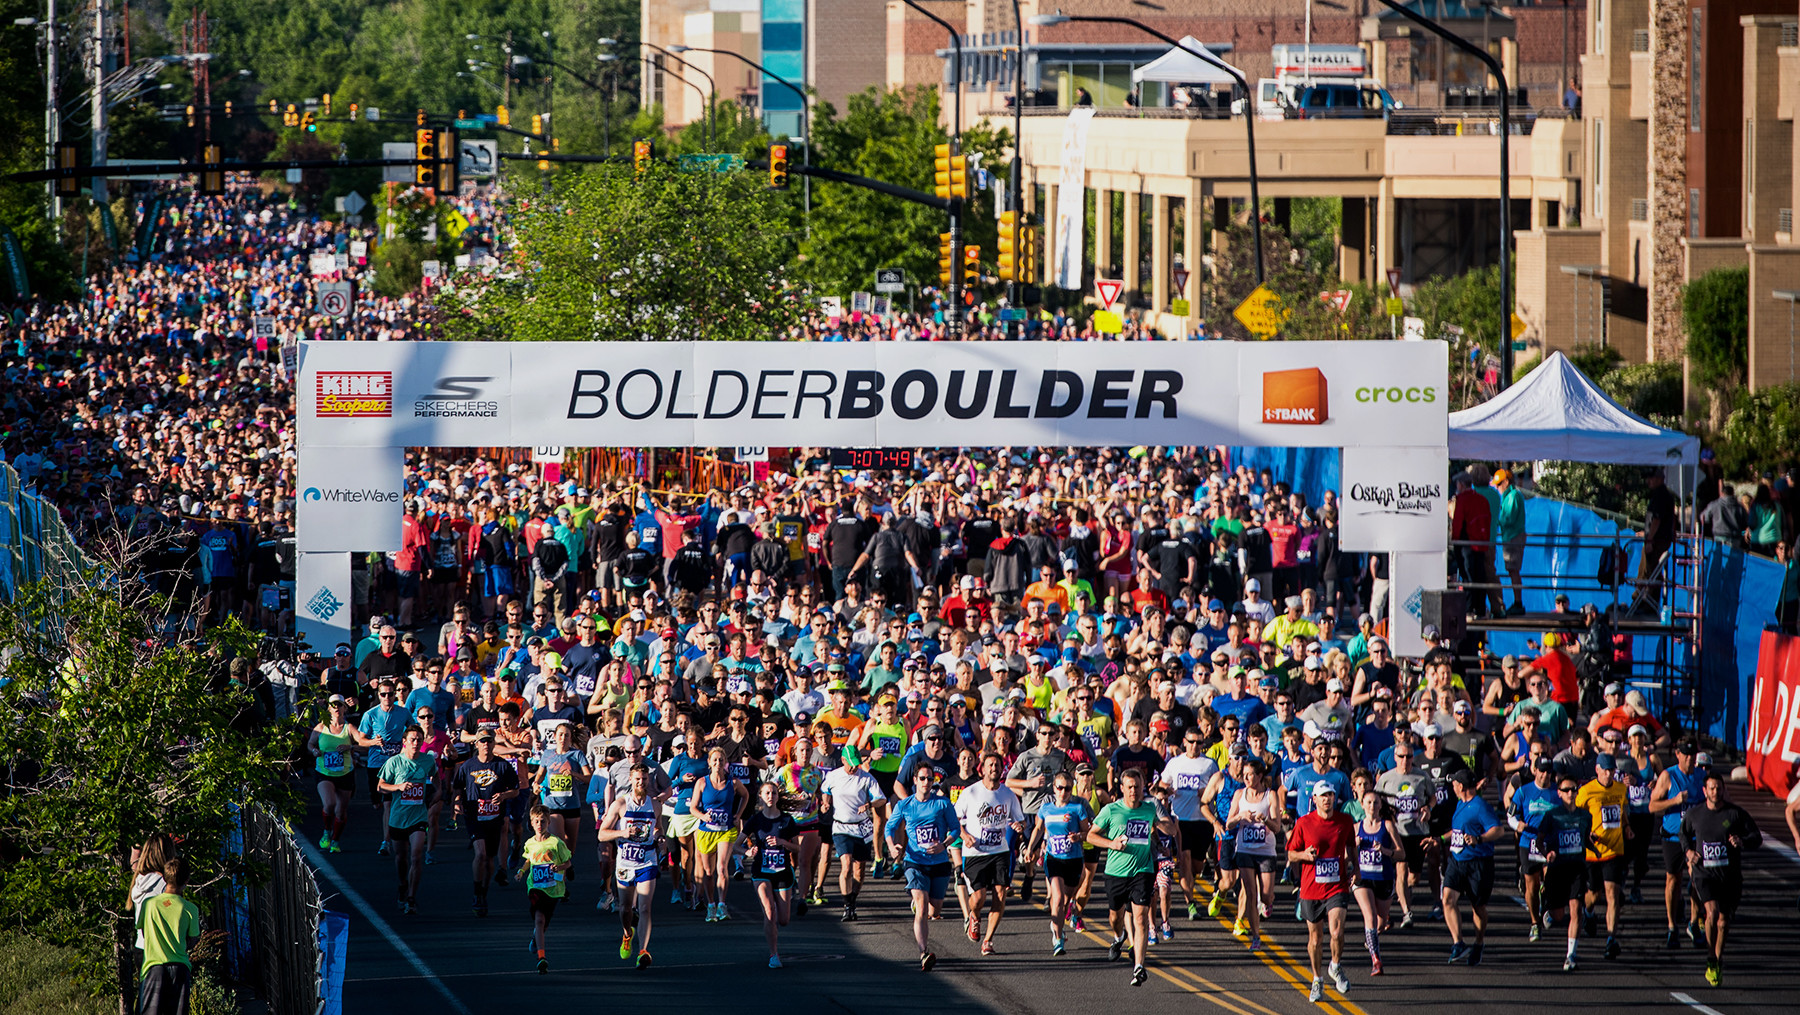 The Bolder Boulder Postpones May Race Running News Daily by My BEST